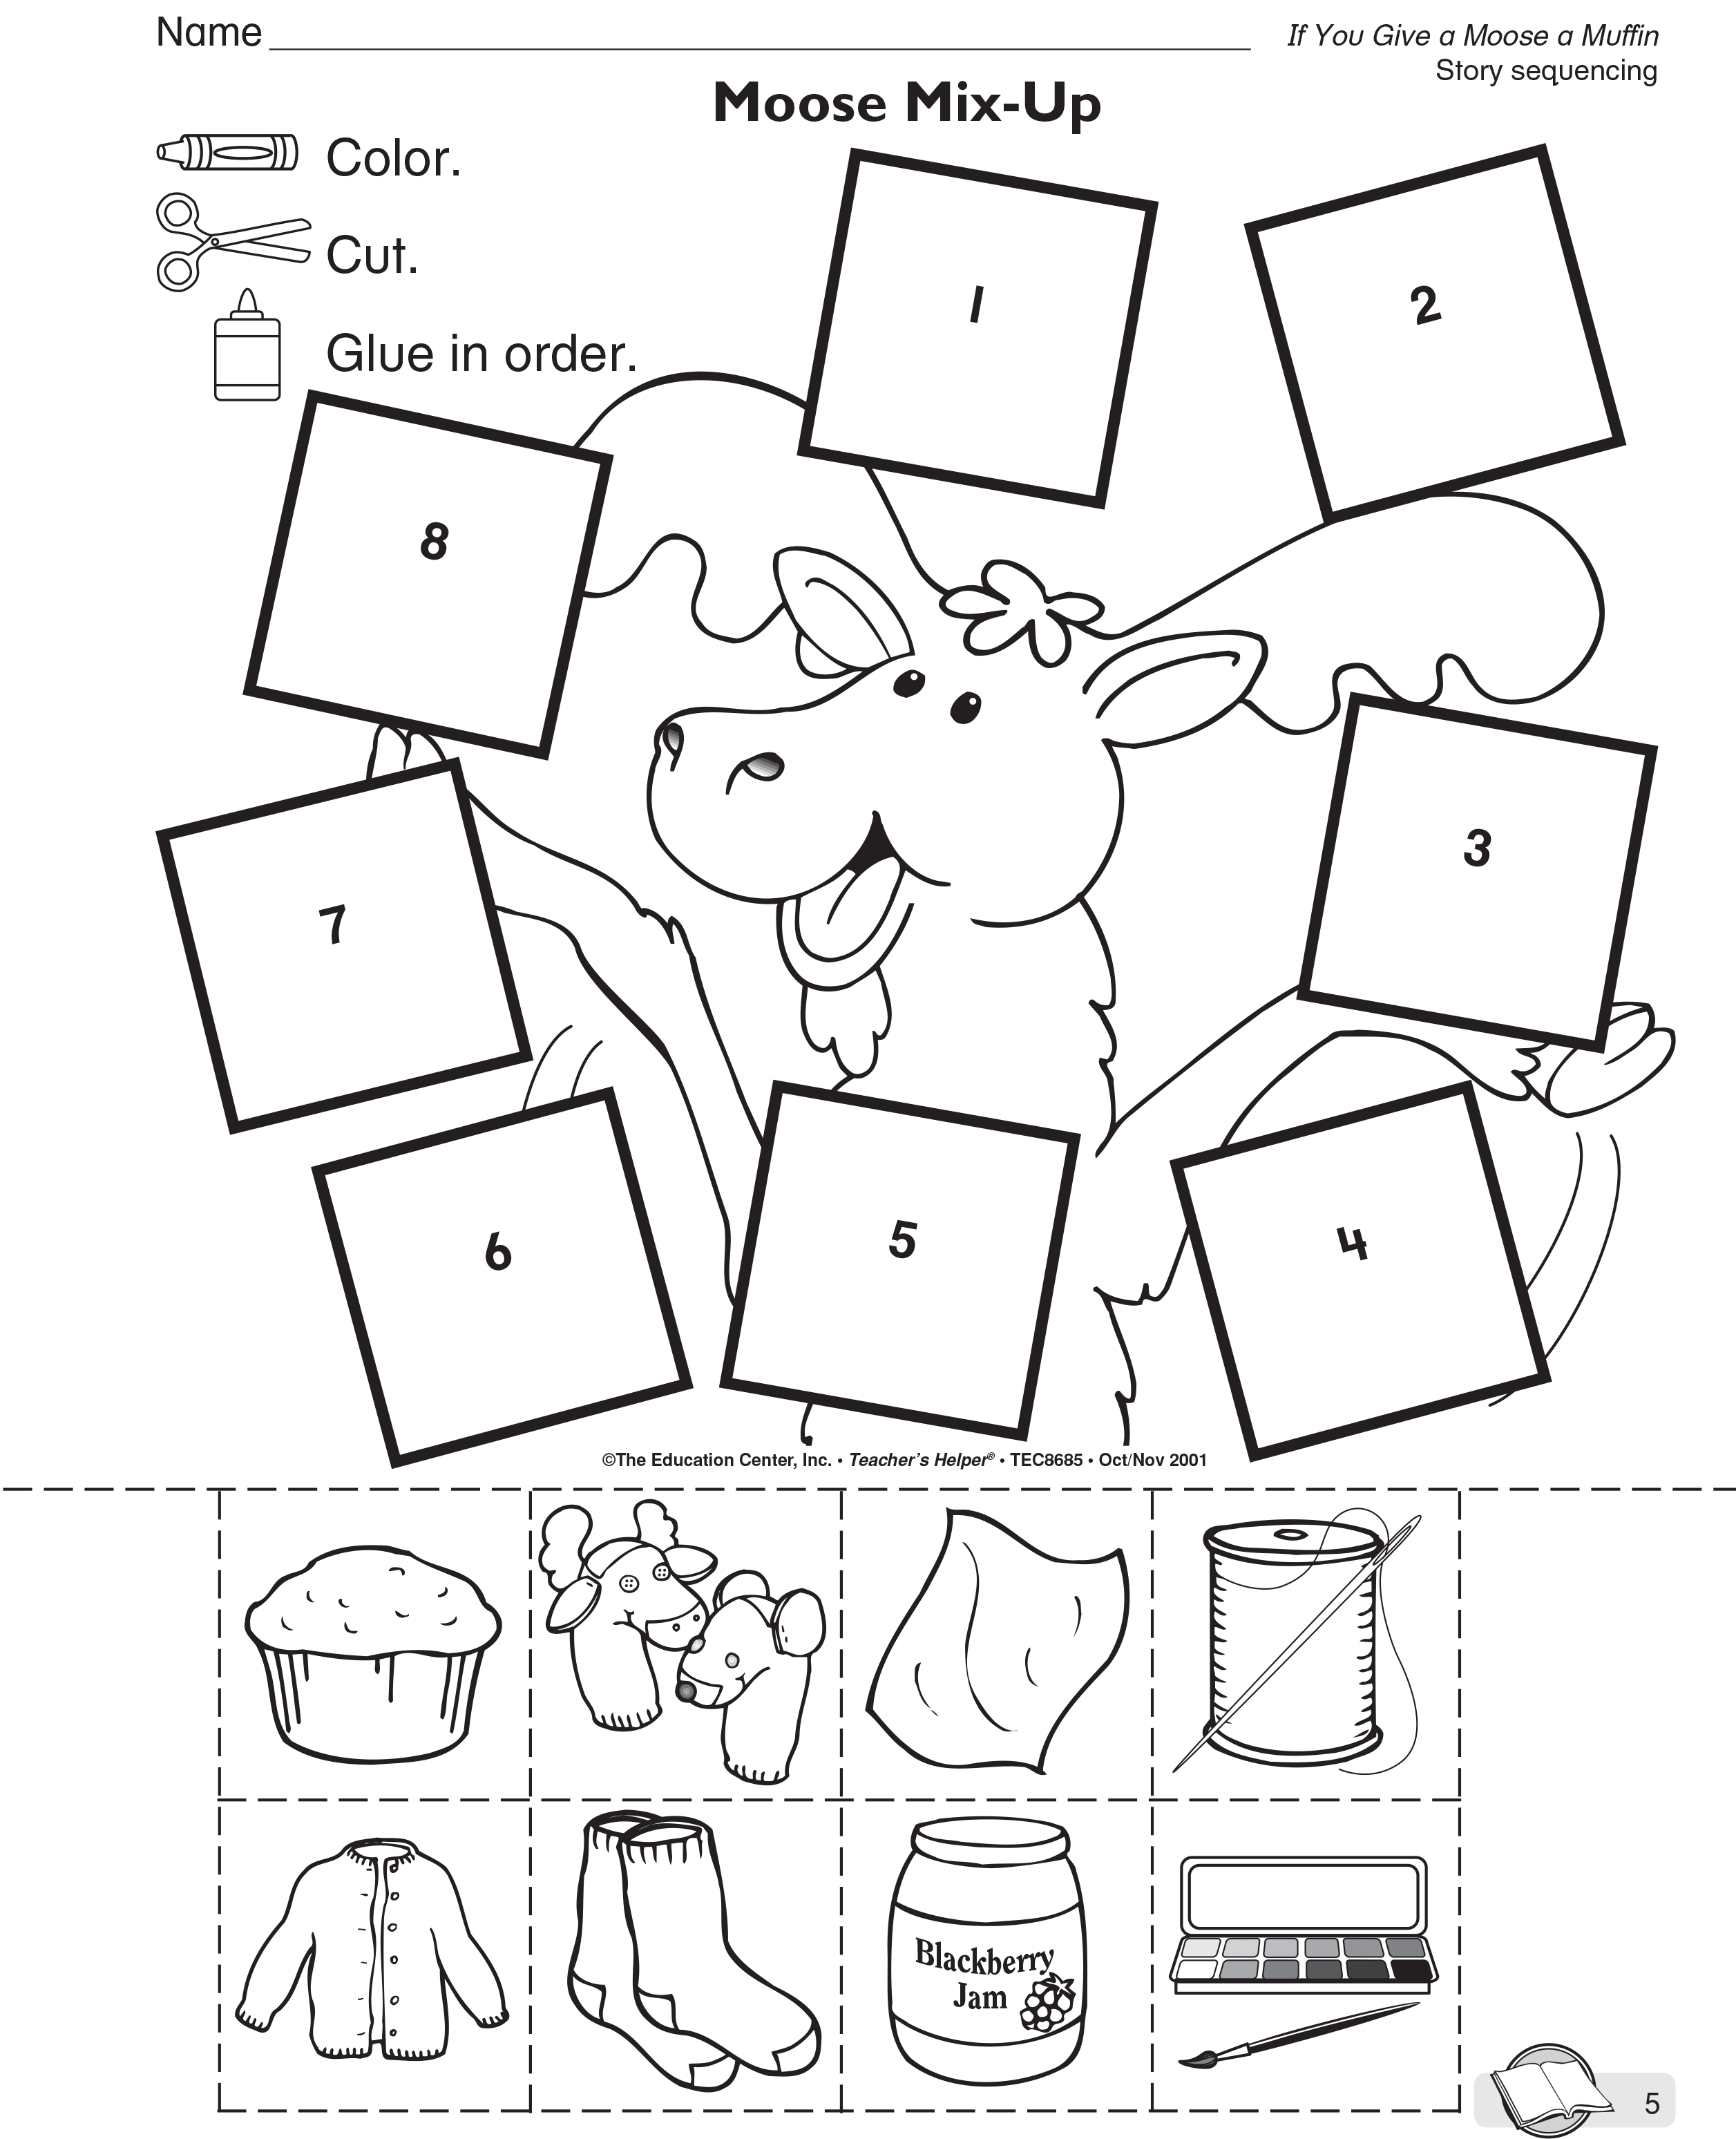 If you give a moose a muffin activity sheet